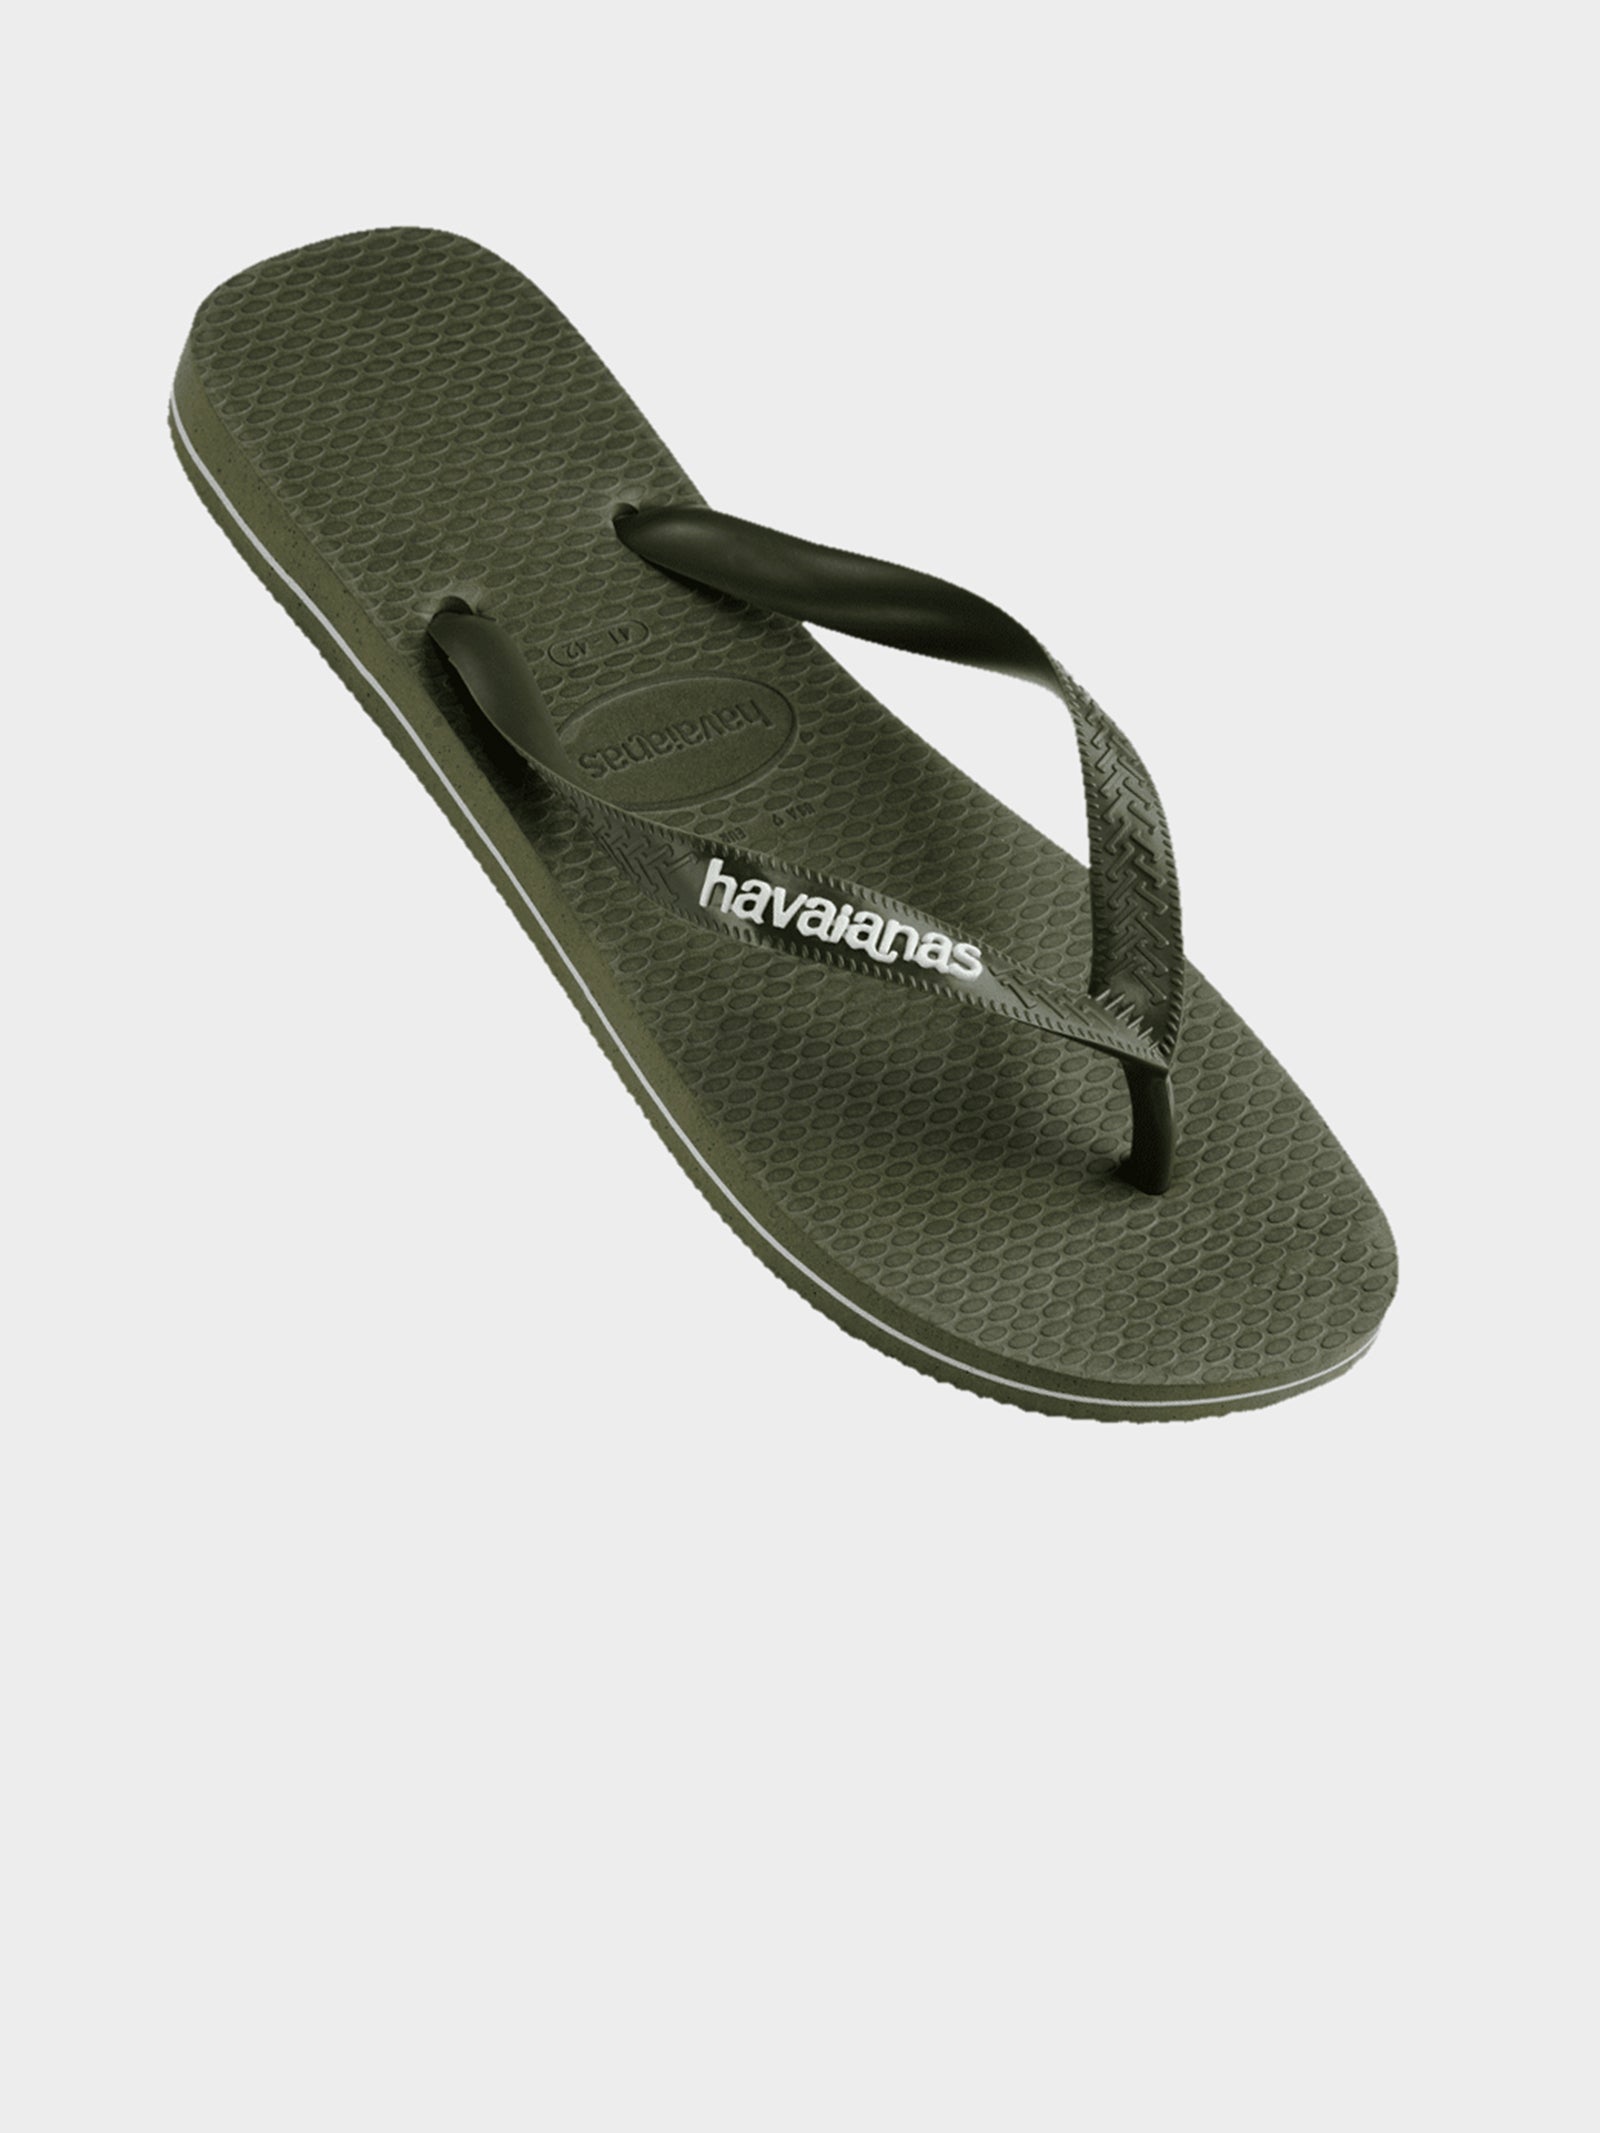 Unisex Rubber Logo Thongs in Olive Green